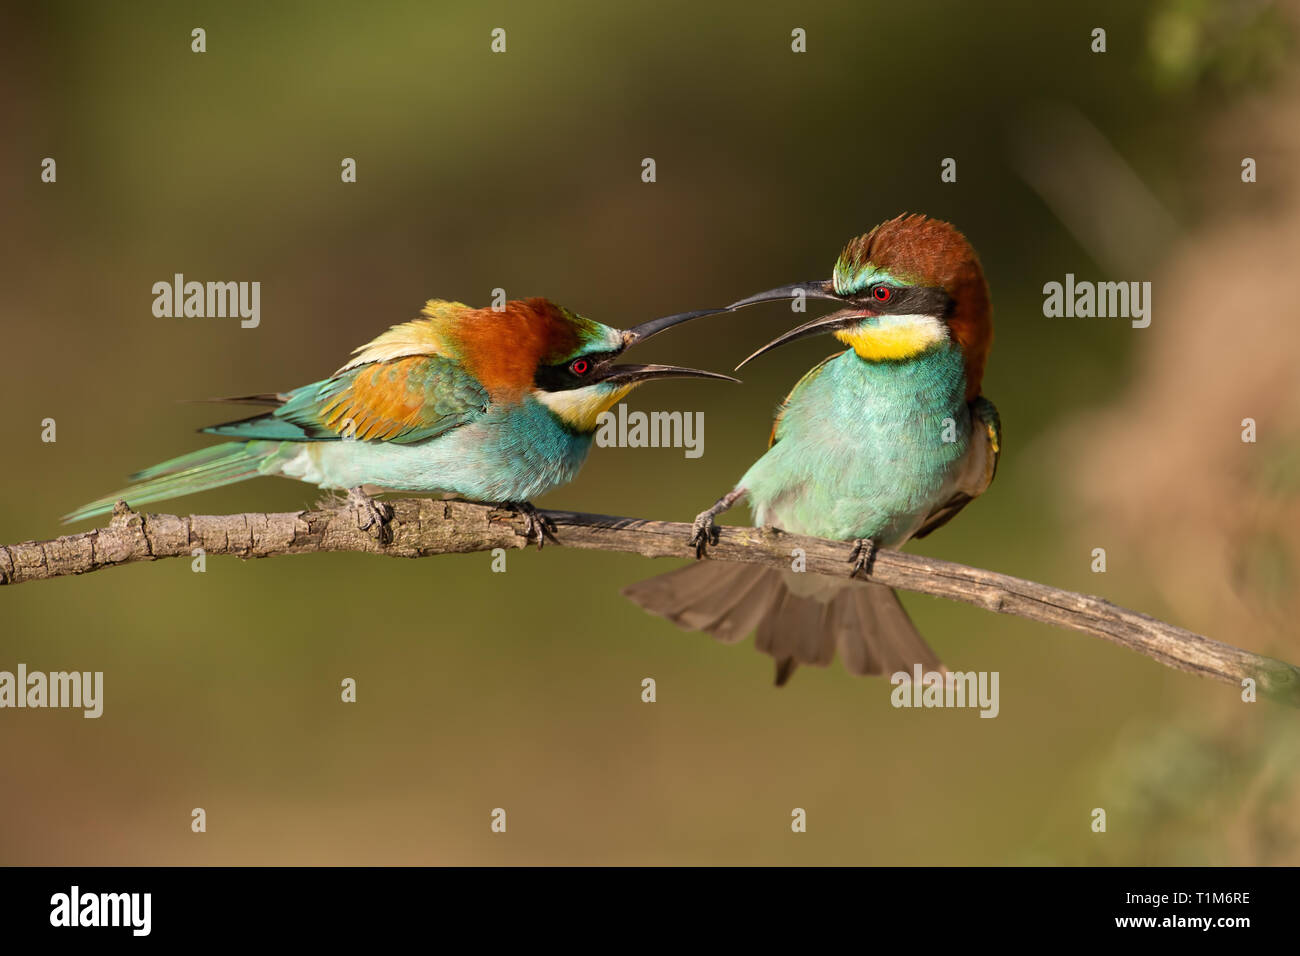 Pair of european bee-eaters, merops apiaster fighting. Two colorful exotic looking birds having a conflict. Action wildlife scenery. Stock Photo